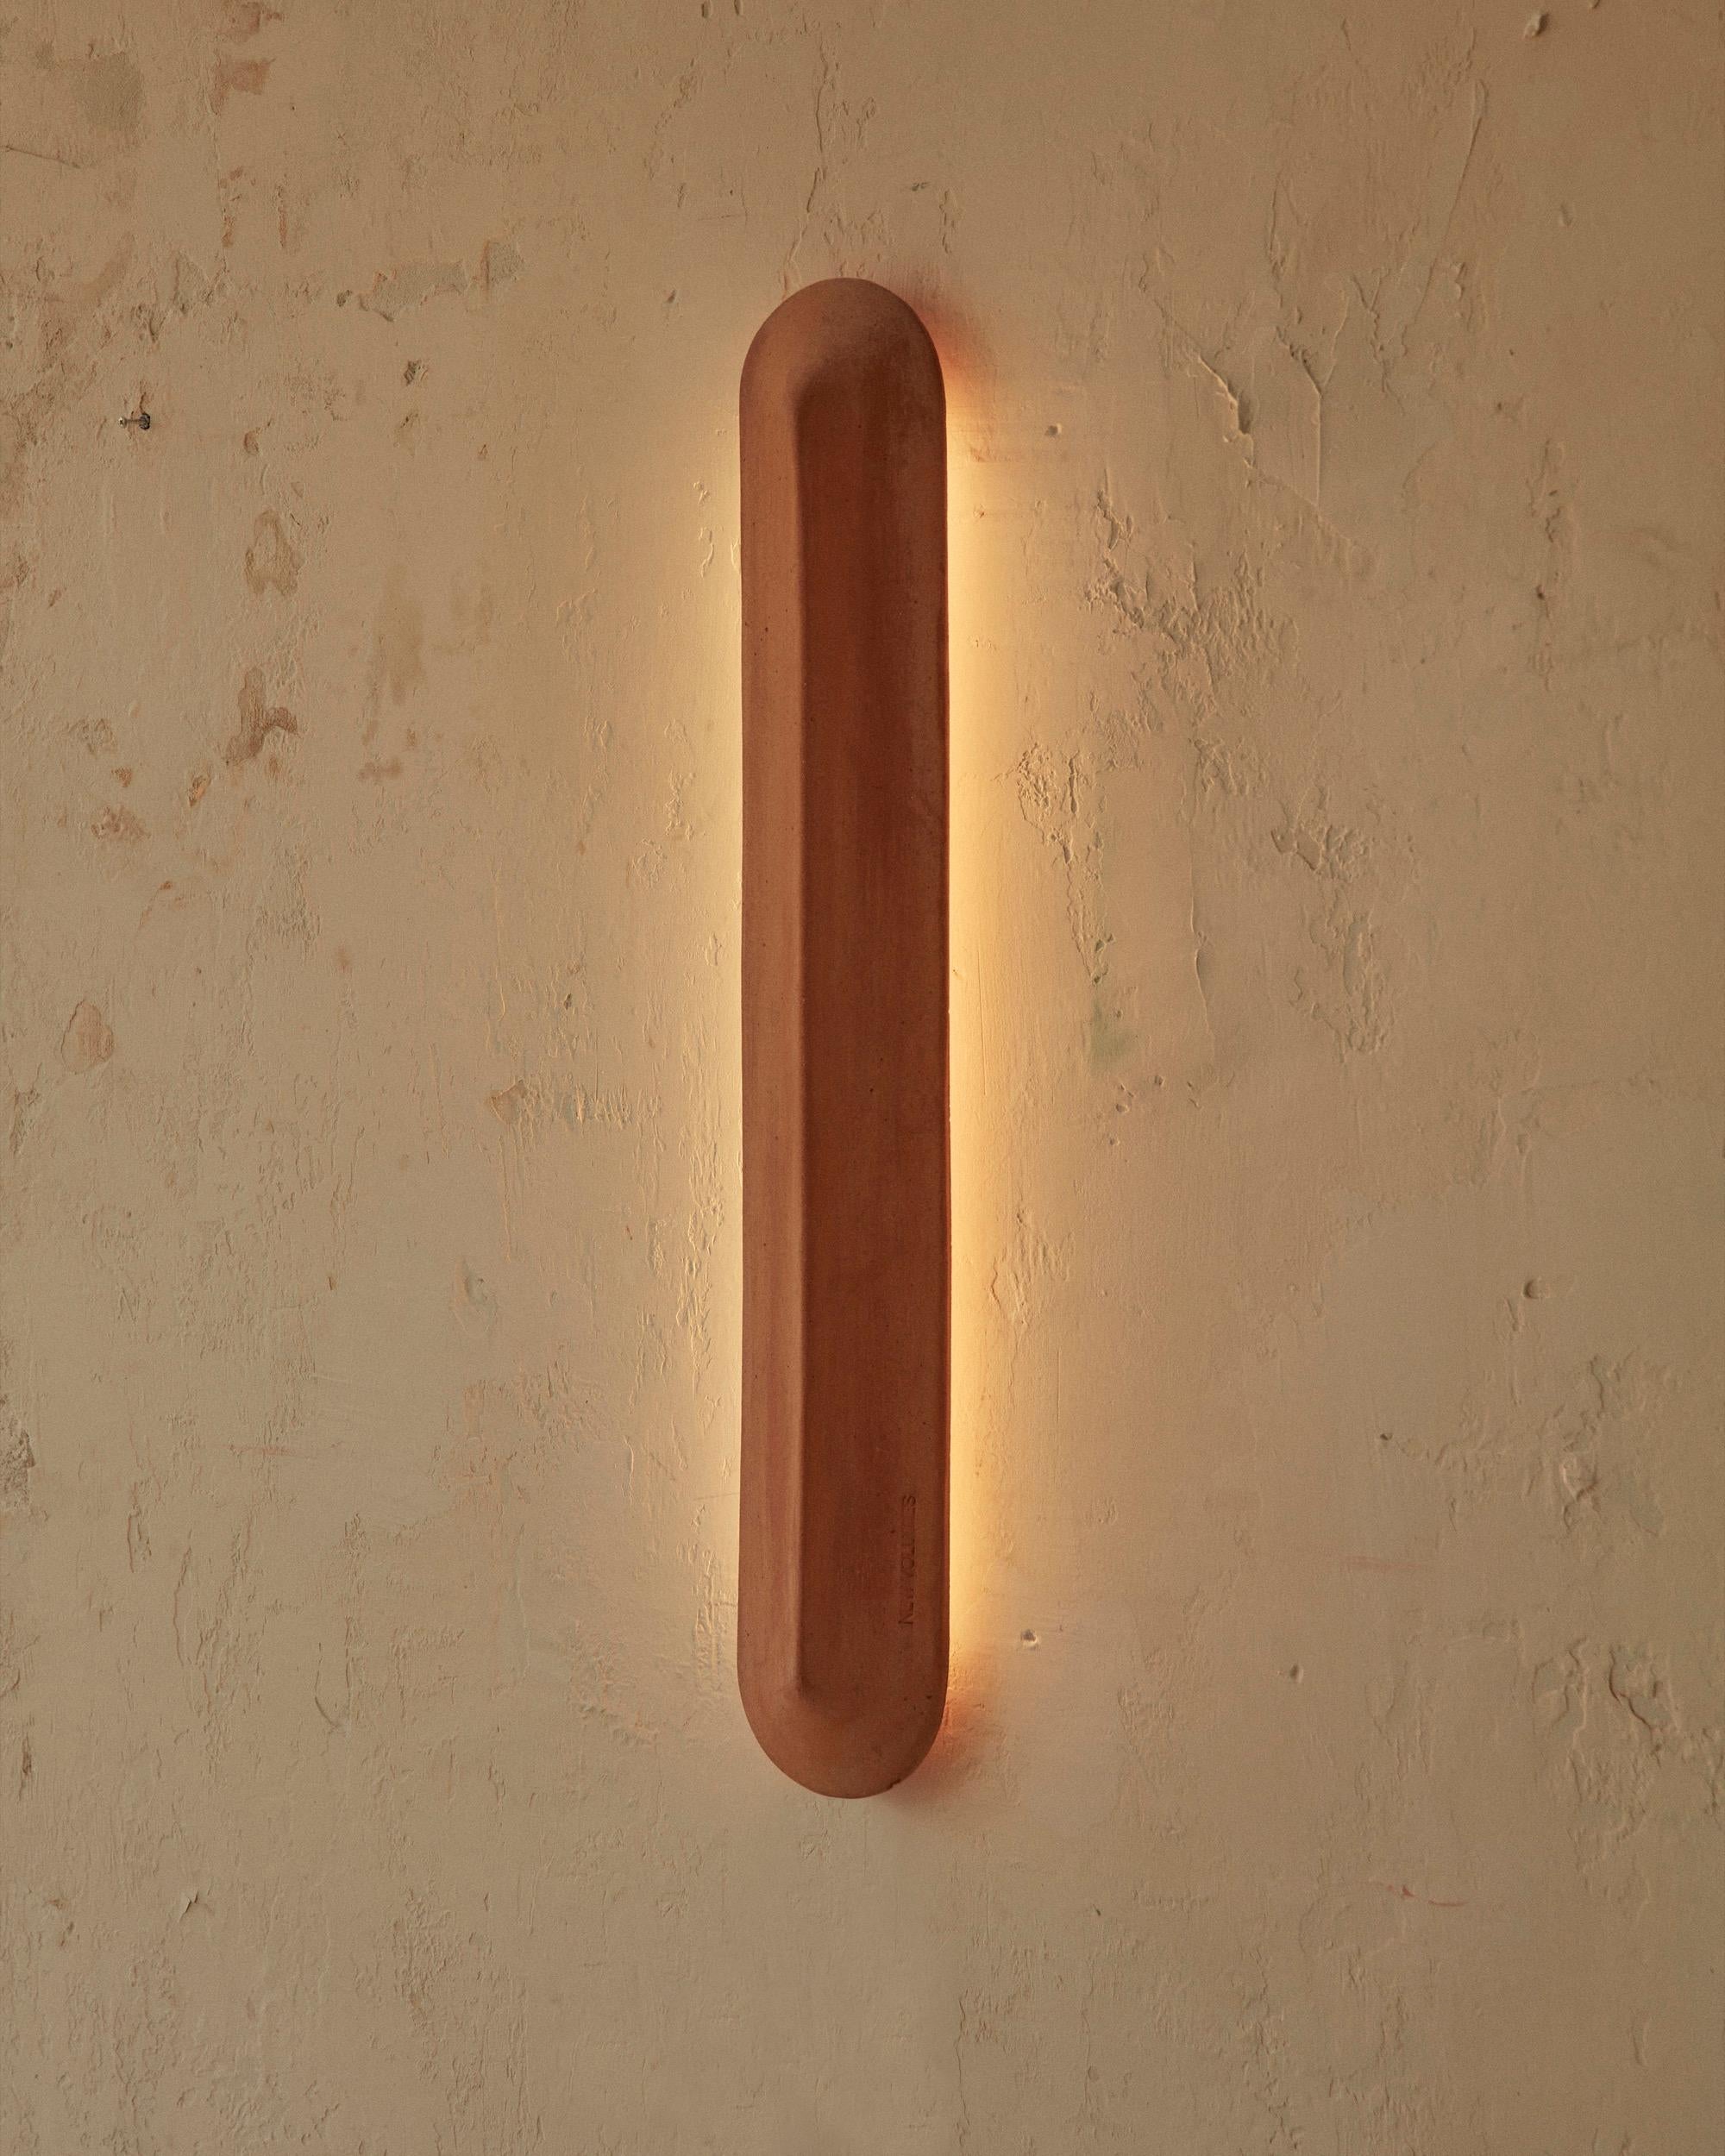 An elegant, elongated wall light, offered in two lengths – 400 millimetres and 900 millimetres. Its shield-like form is characterised by a central sharp line or ‘pinch’ that allows light to fall differently on each side of the terracotta,